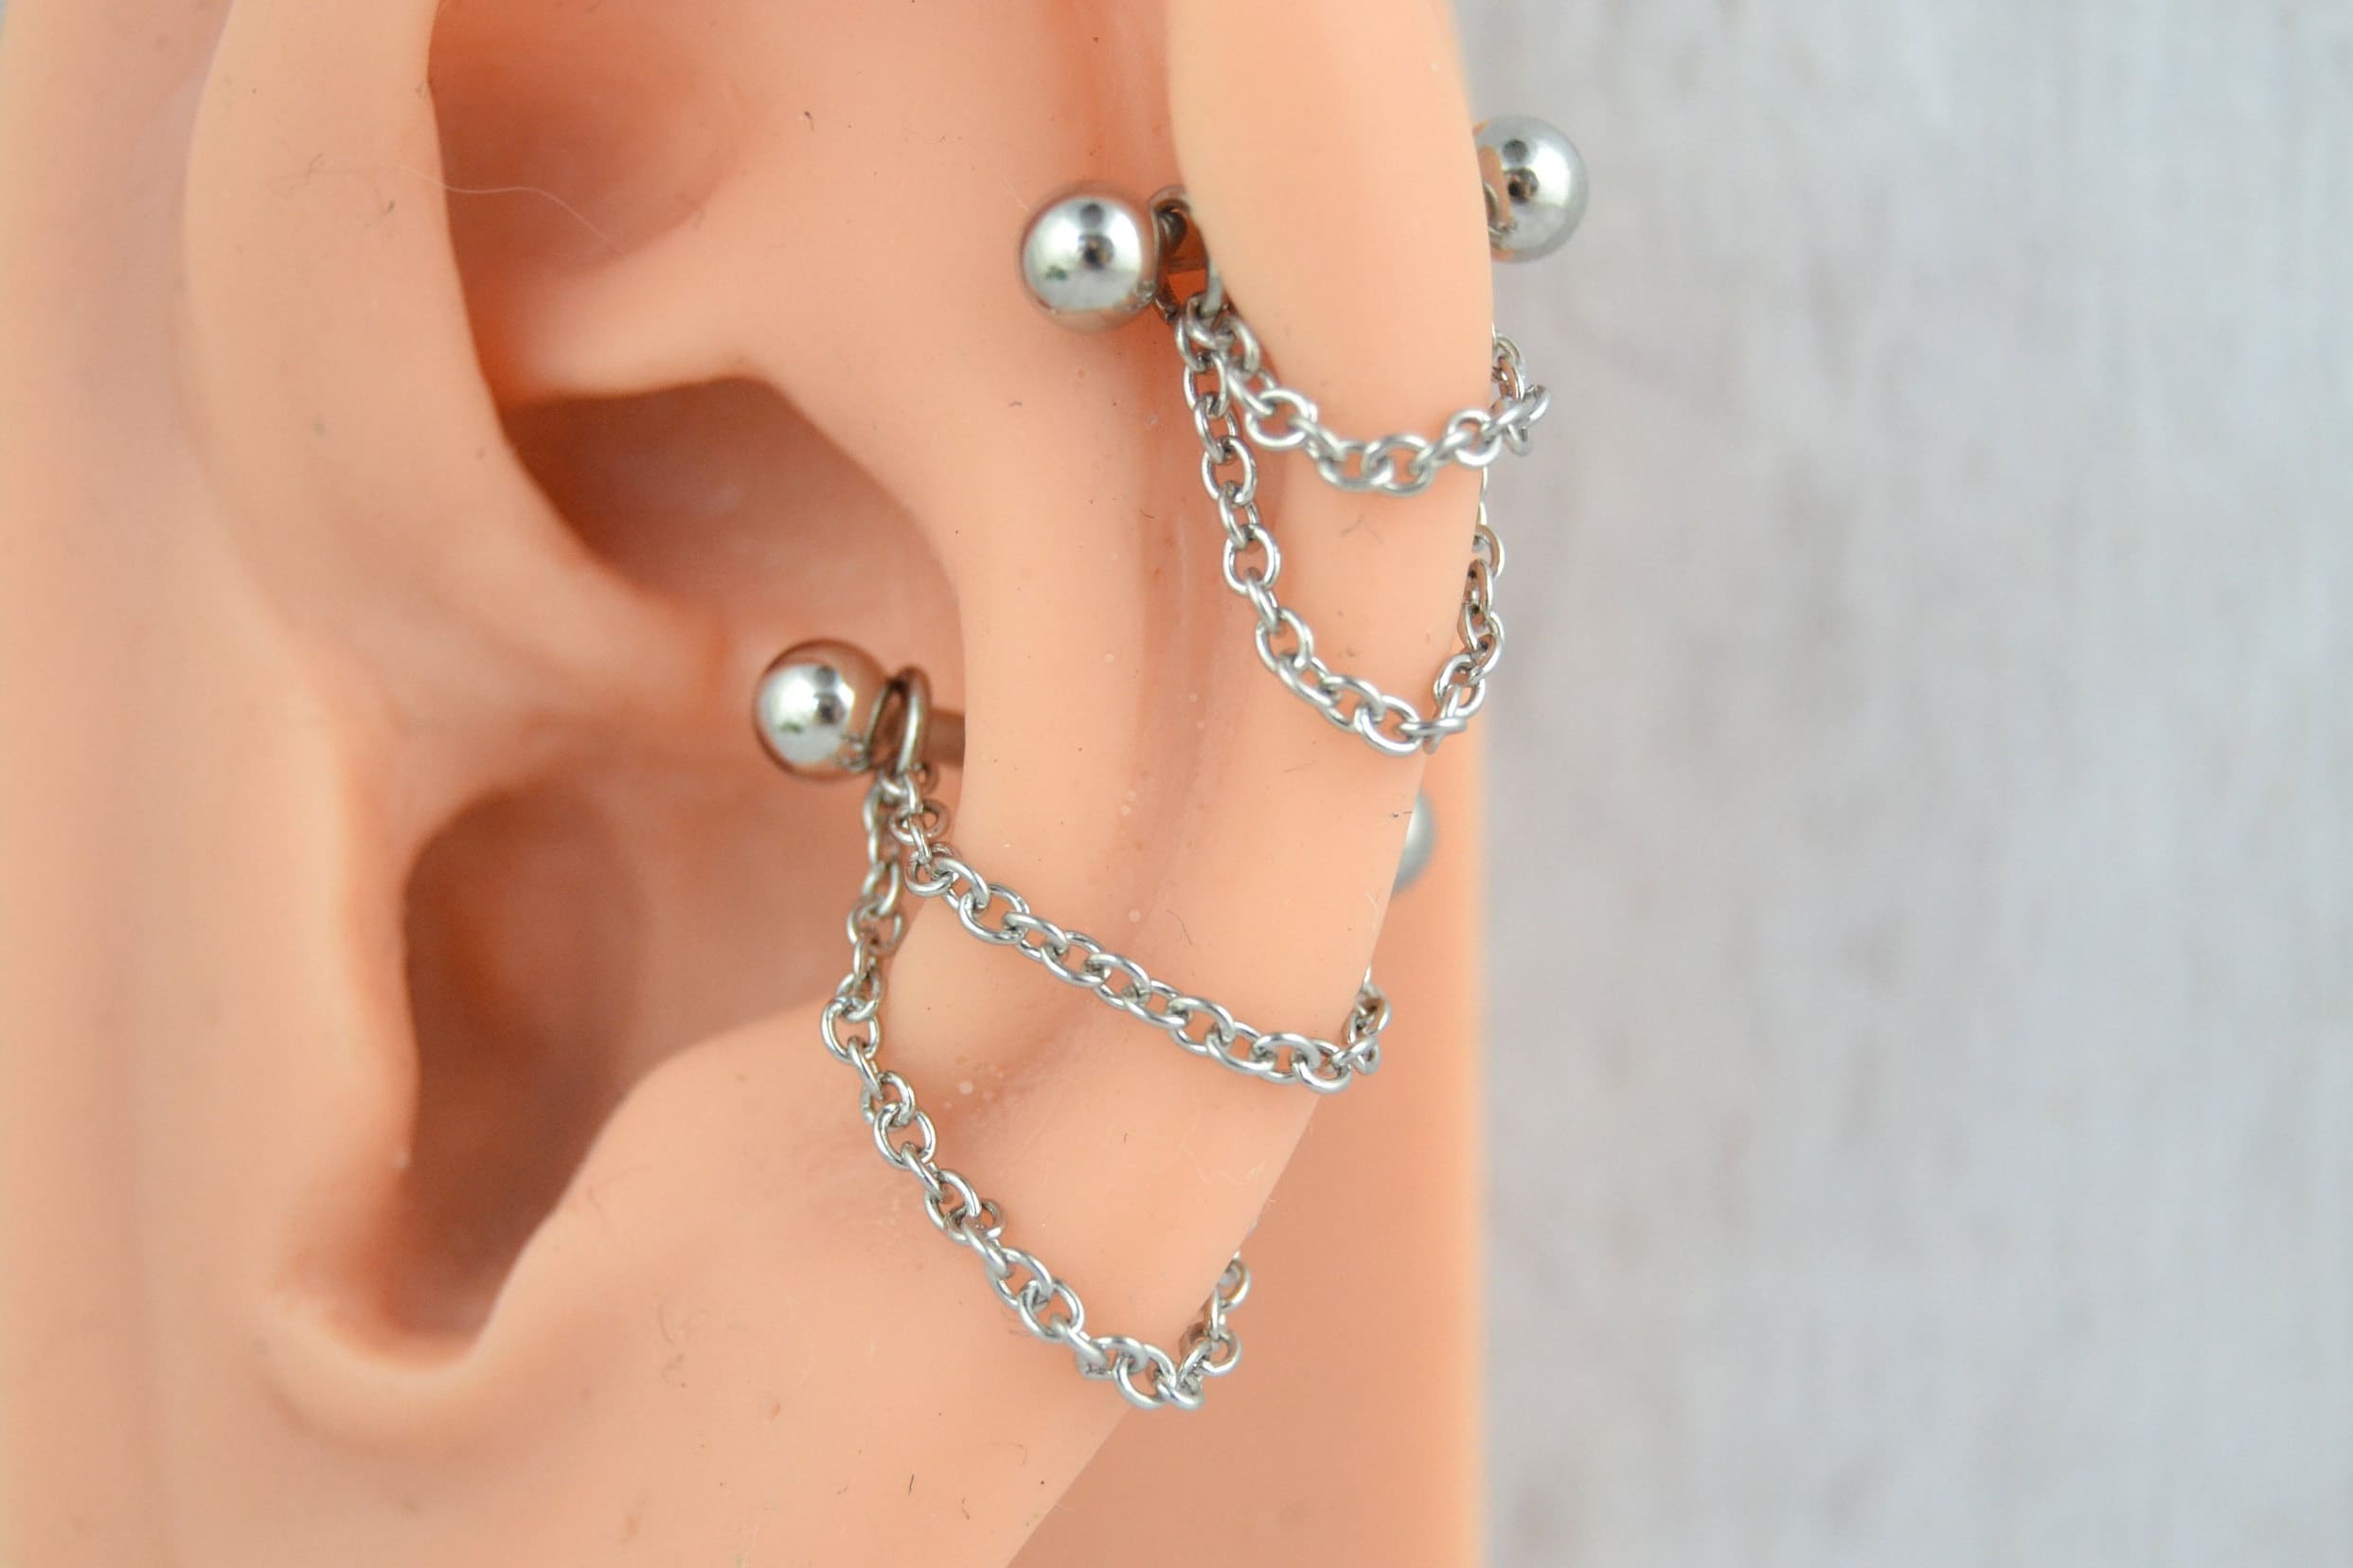 BodyBonita 3Pairs Stainless Steel Conch Double Chain Earrings,Minimalist Dangle Conch Earrings,Cuff Earrings,Helix Cartilage Tragus Barbell with Chain 